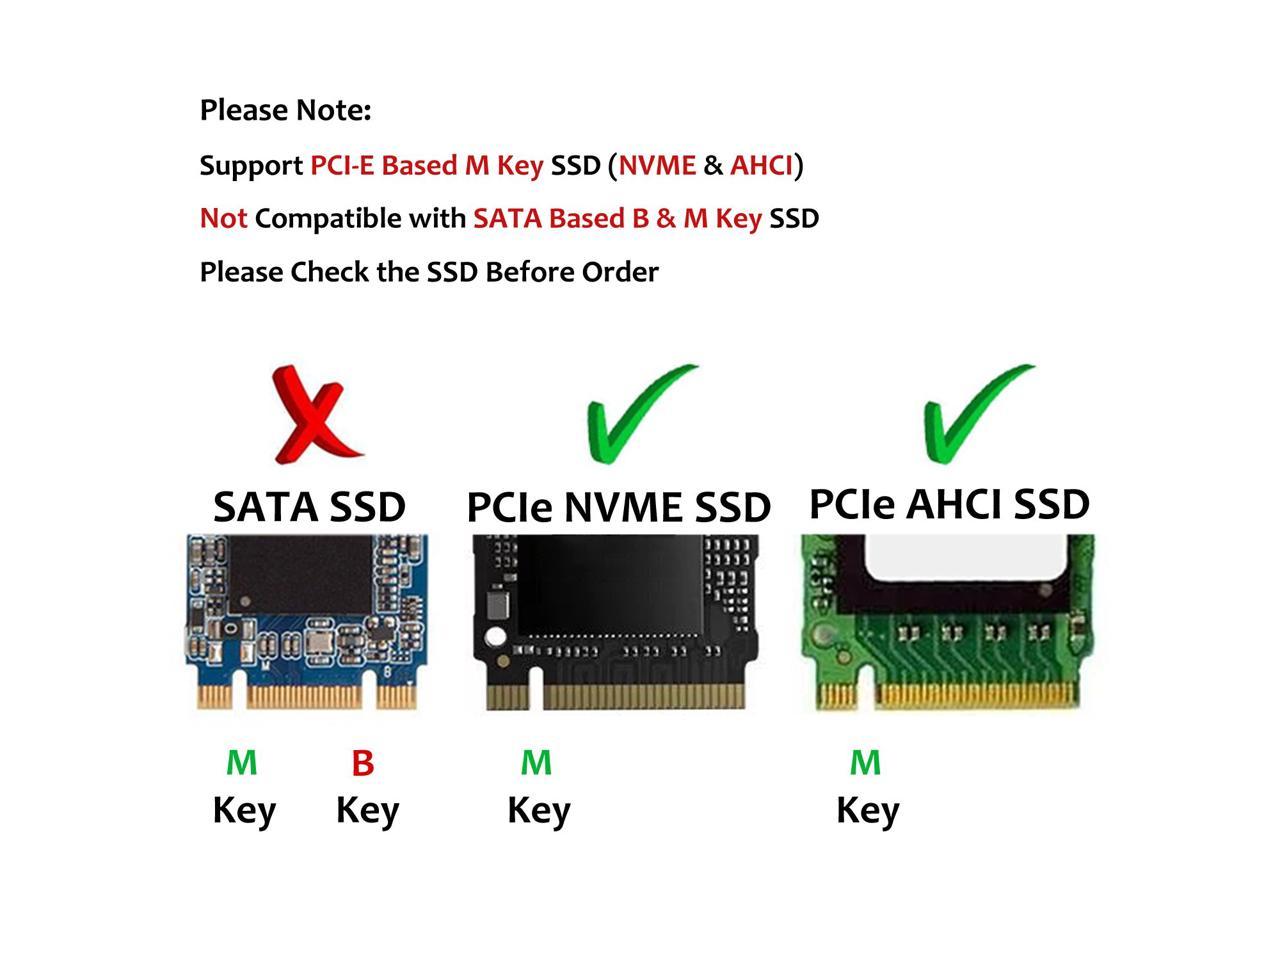 can i pcie usb 3 card in pcie x4 slot